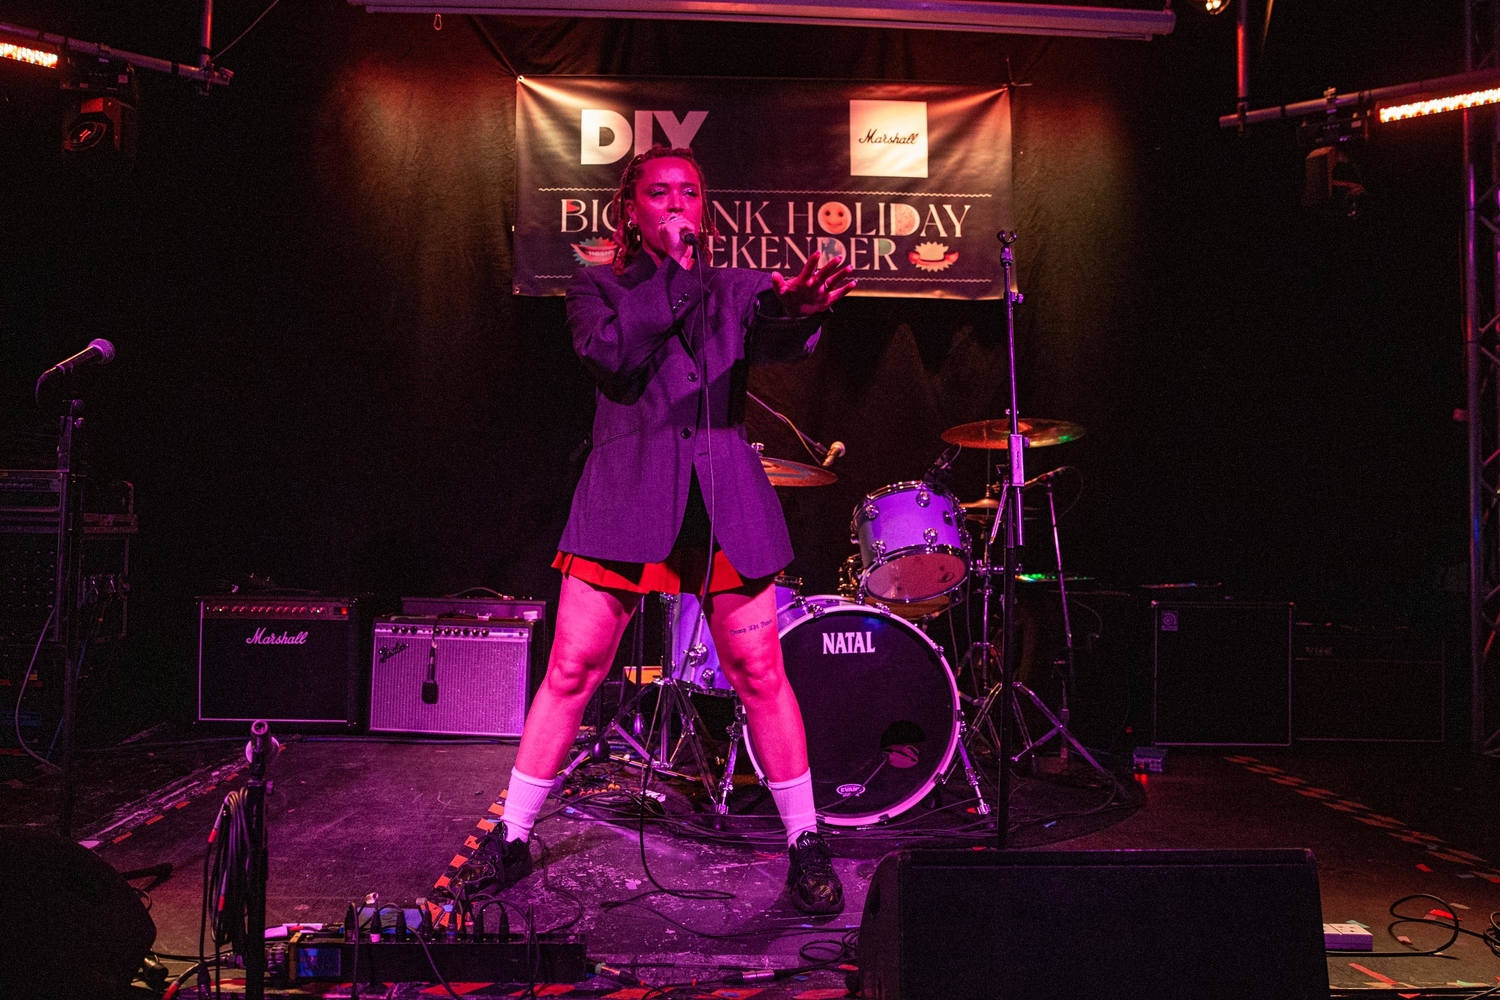 Sorry, Goat Girl, Connie Constance and more set Hackney ablaze at DIY’s Big Bank Holiday Weekender